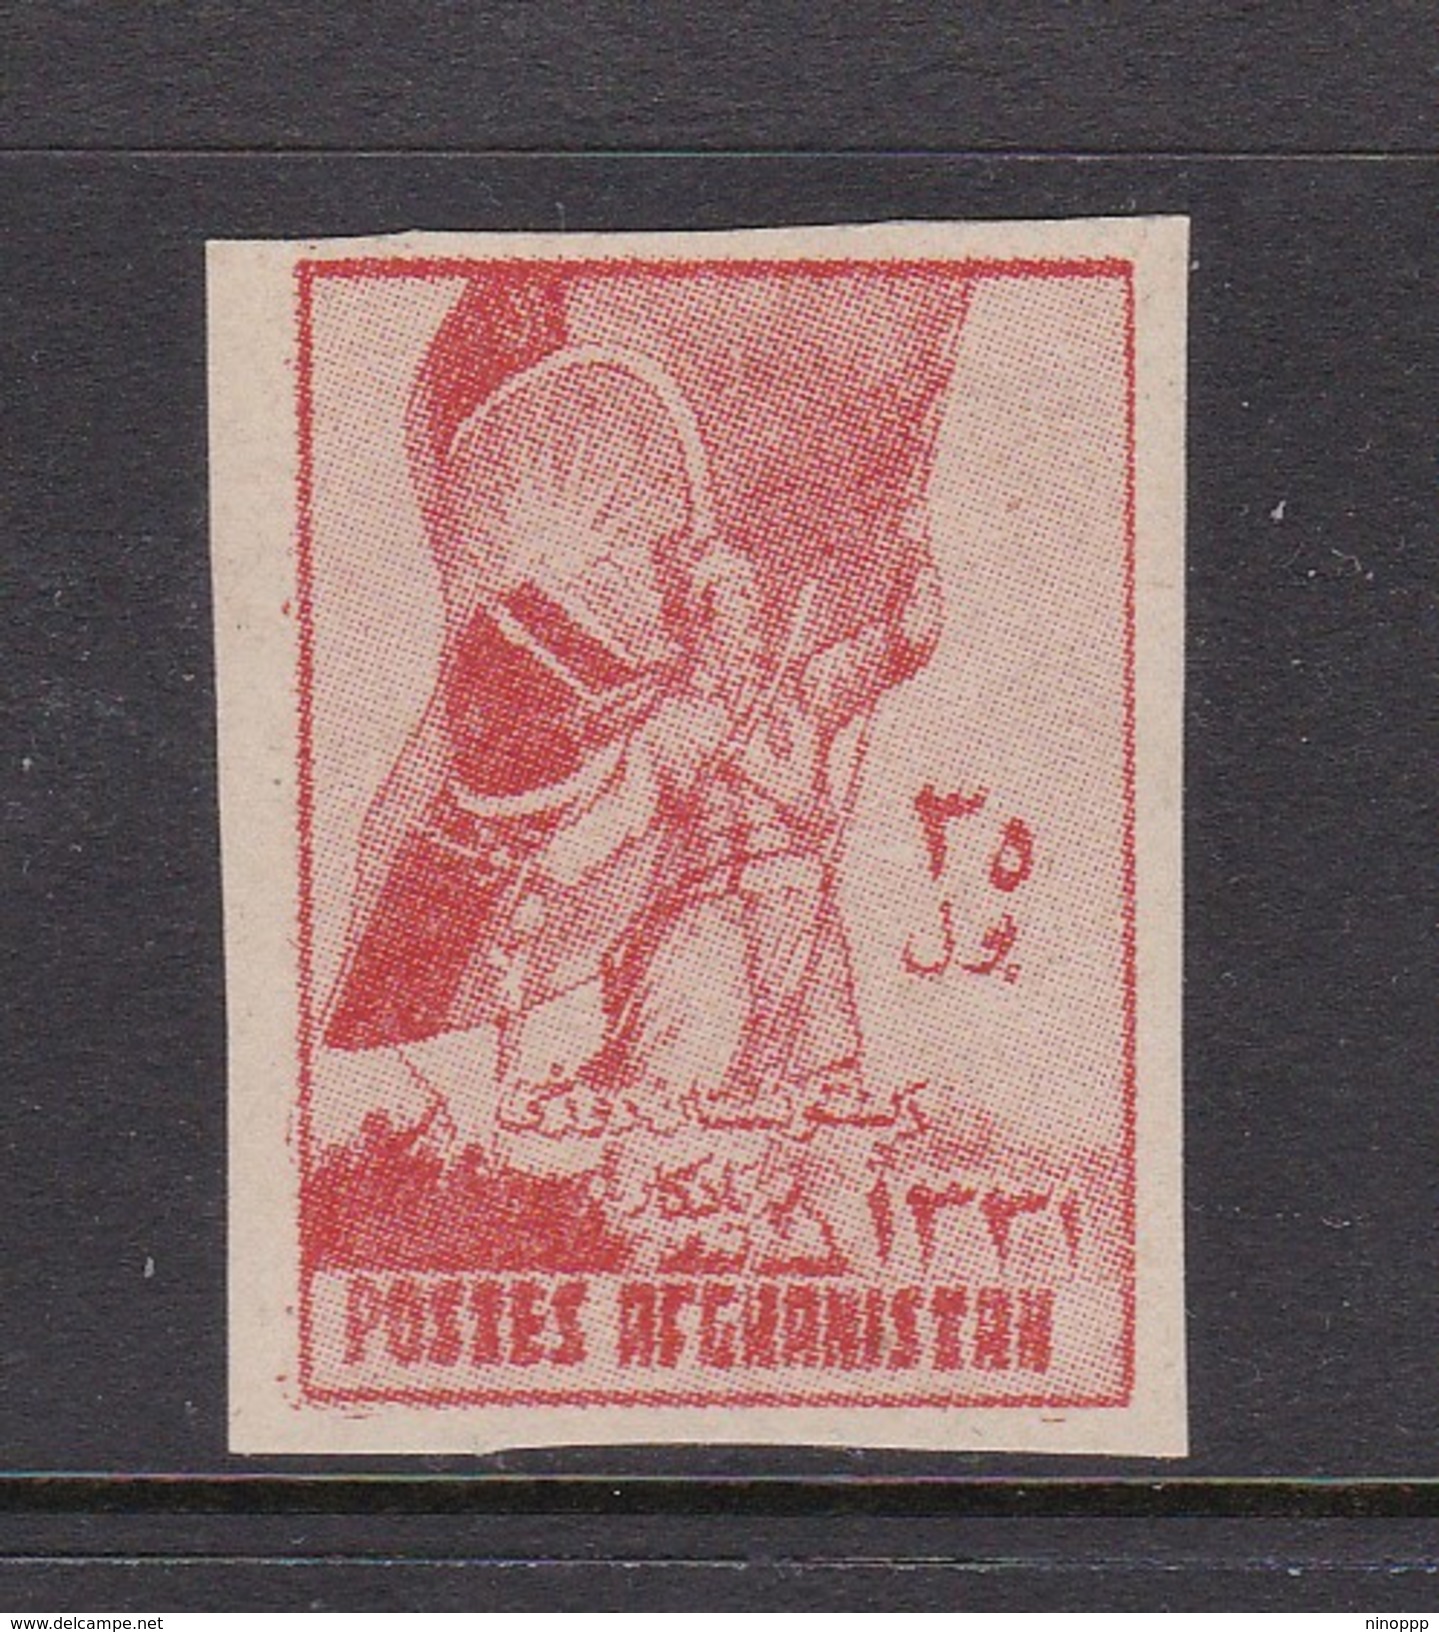 Afghanistan SG 362 1952 Pashtunistan Day 35p Red Imperforated MNH - Afghanistan